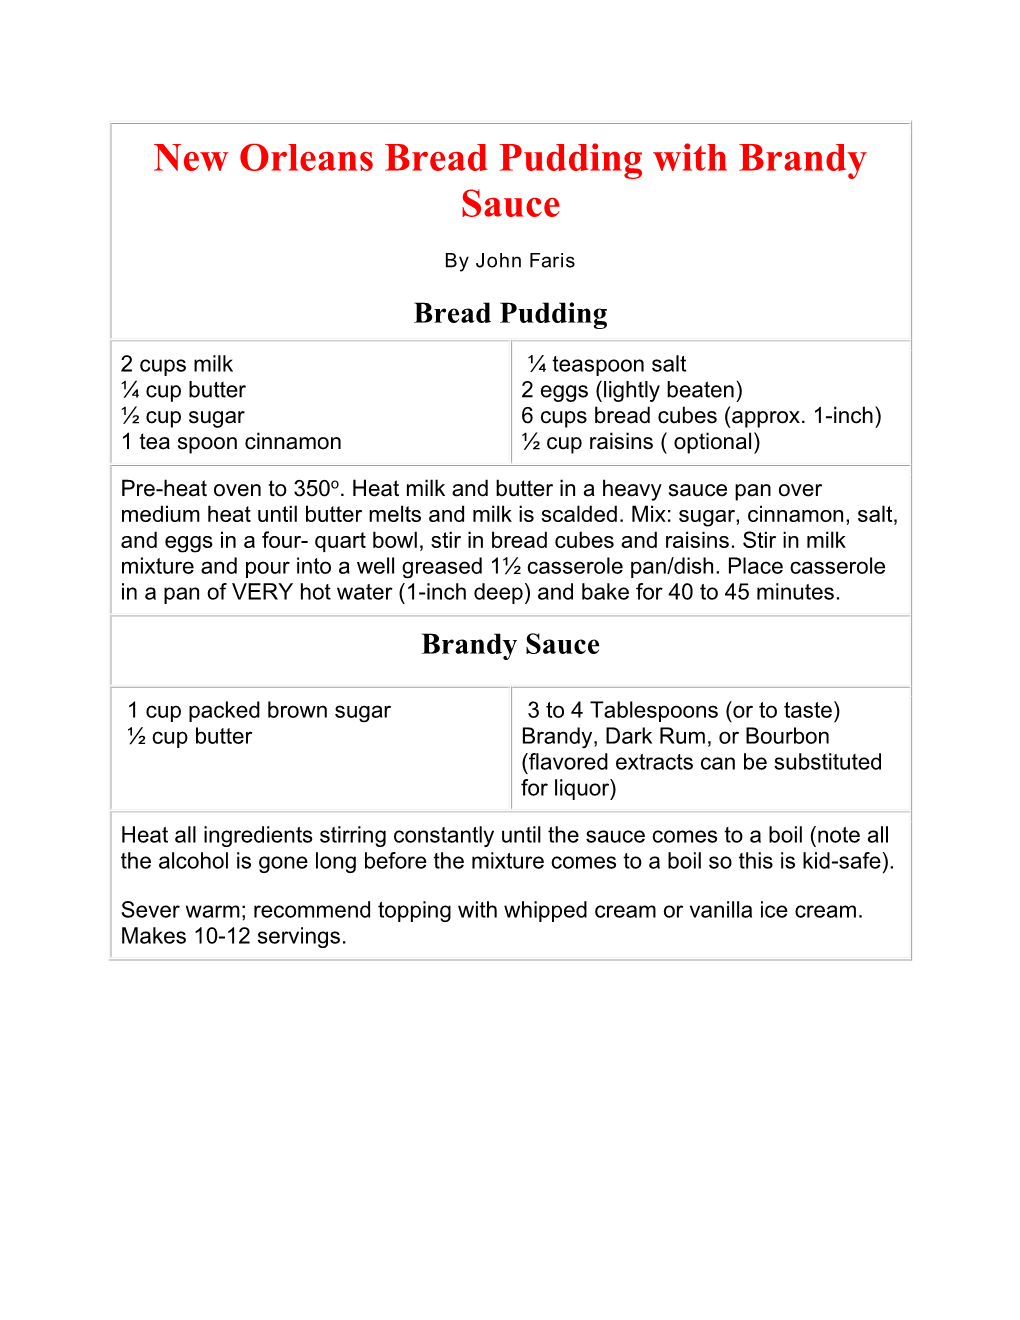 New Orleans Bread Pudding with Brandy Sauce